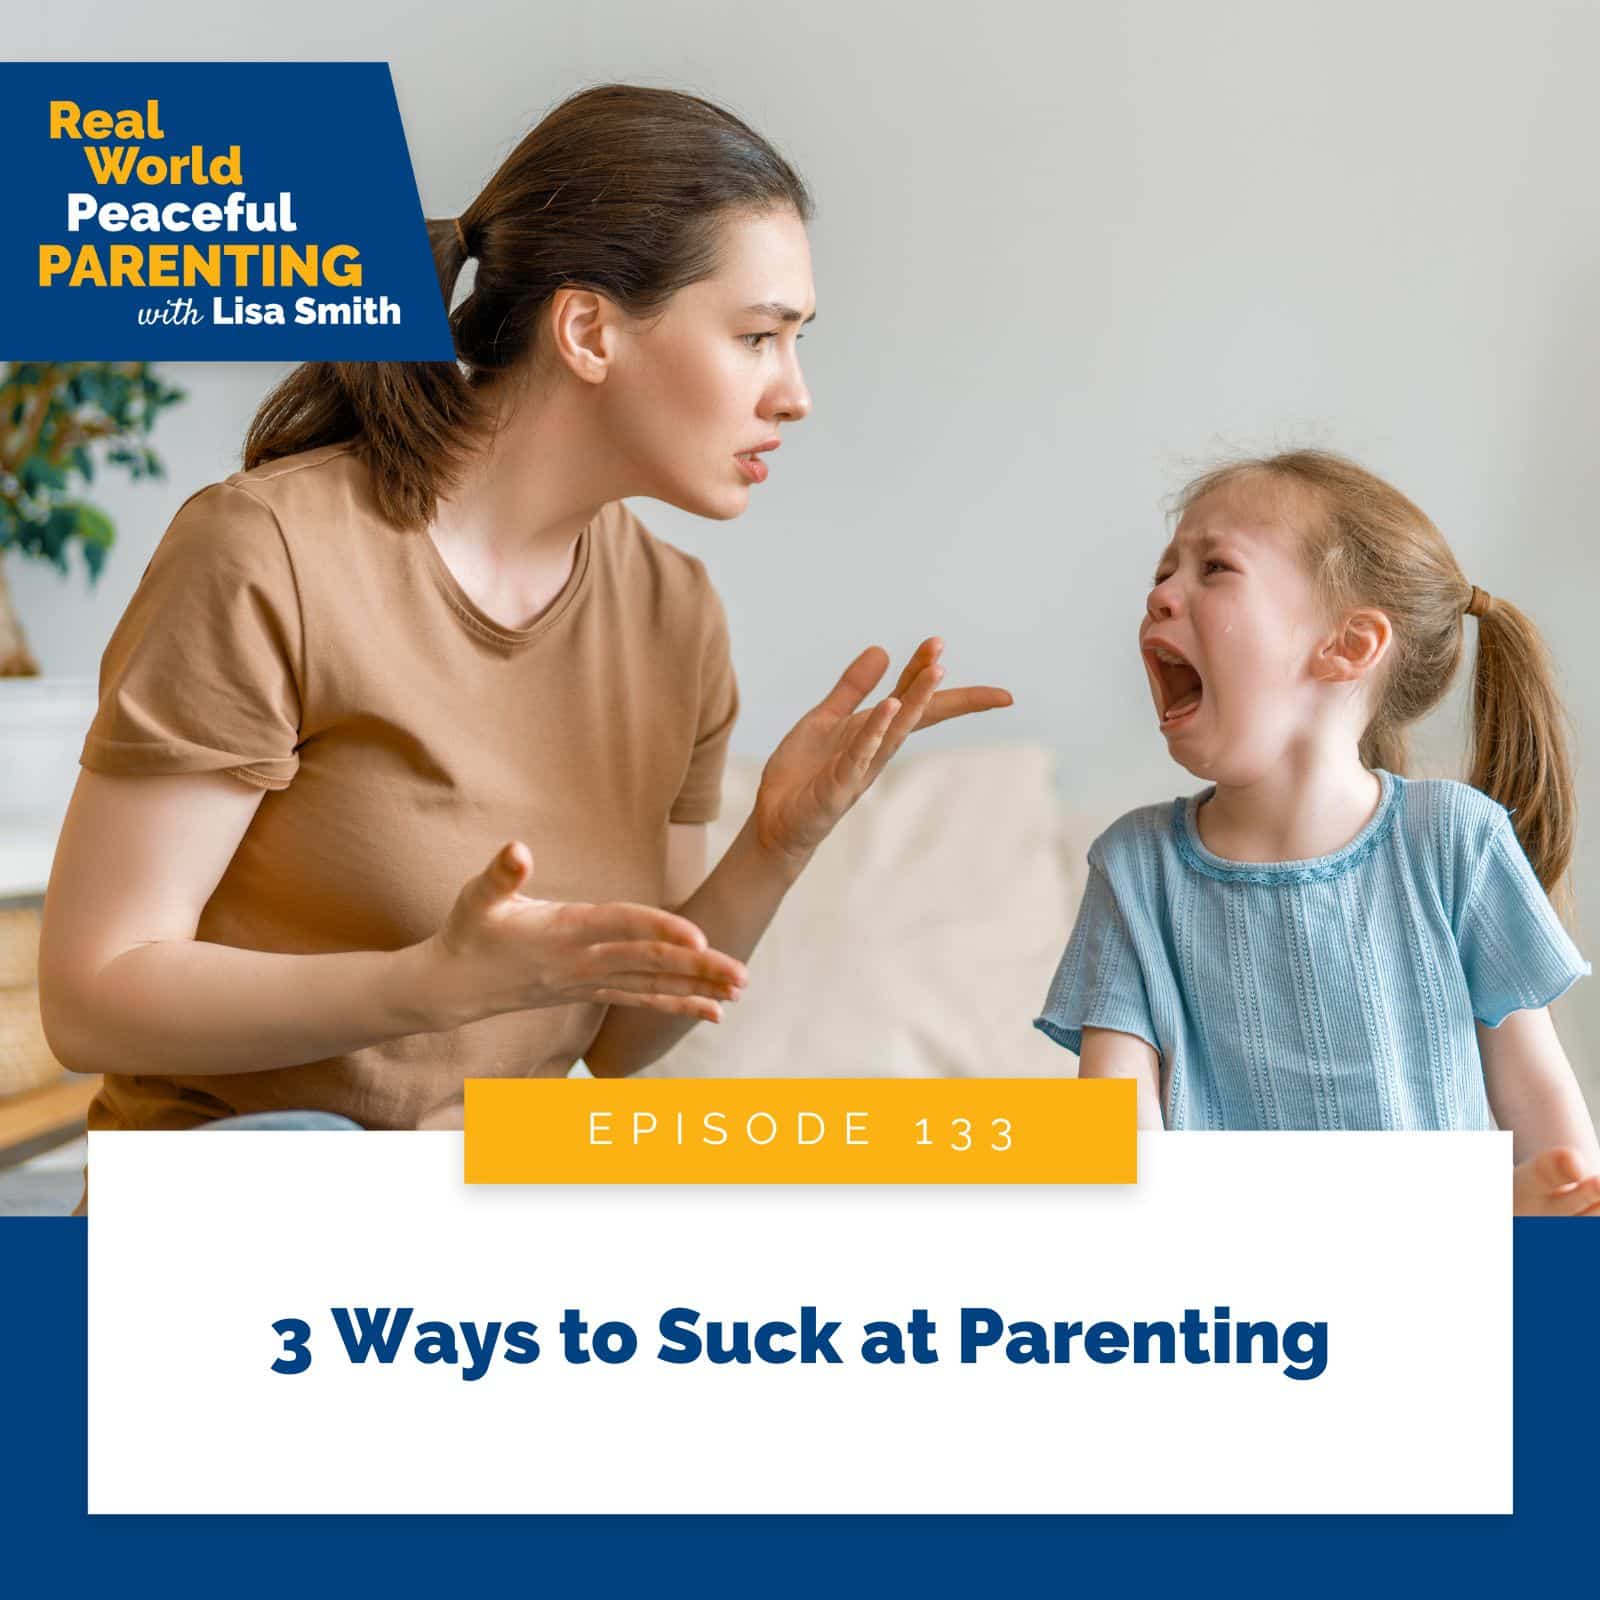 Real World Peaceful Parenting Lisa Smith | 3 Ways to Suck at Parenting